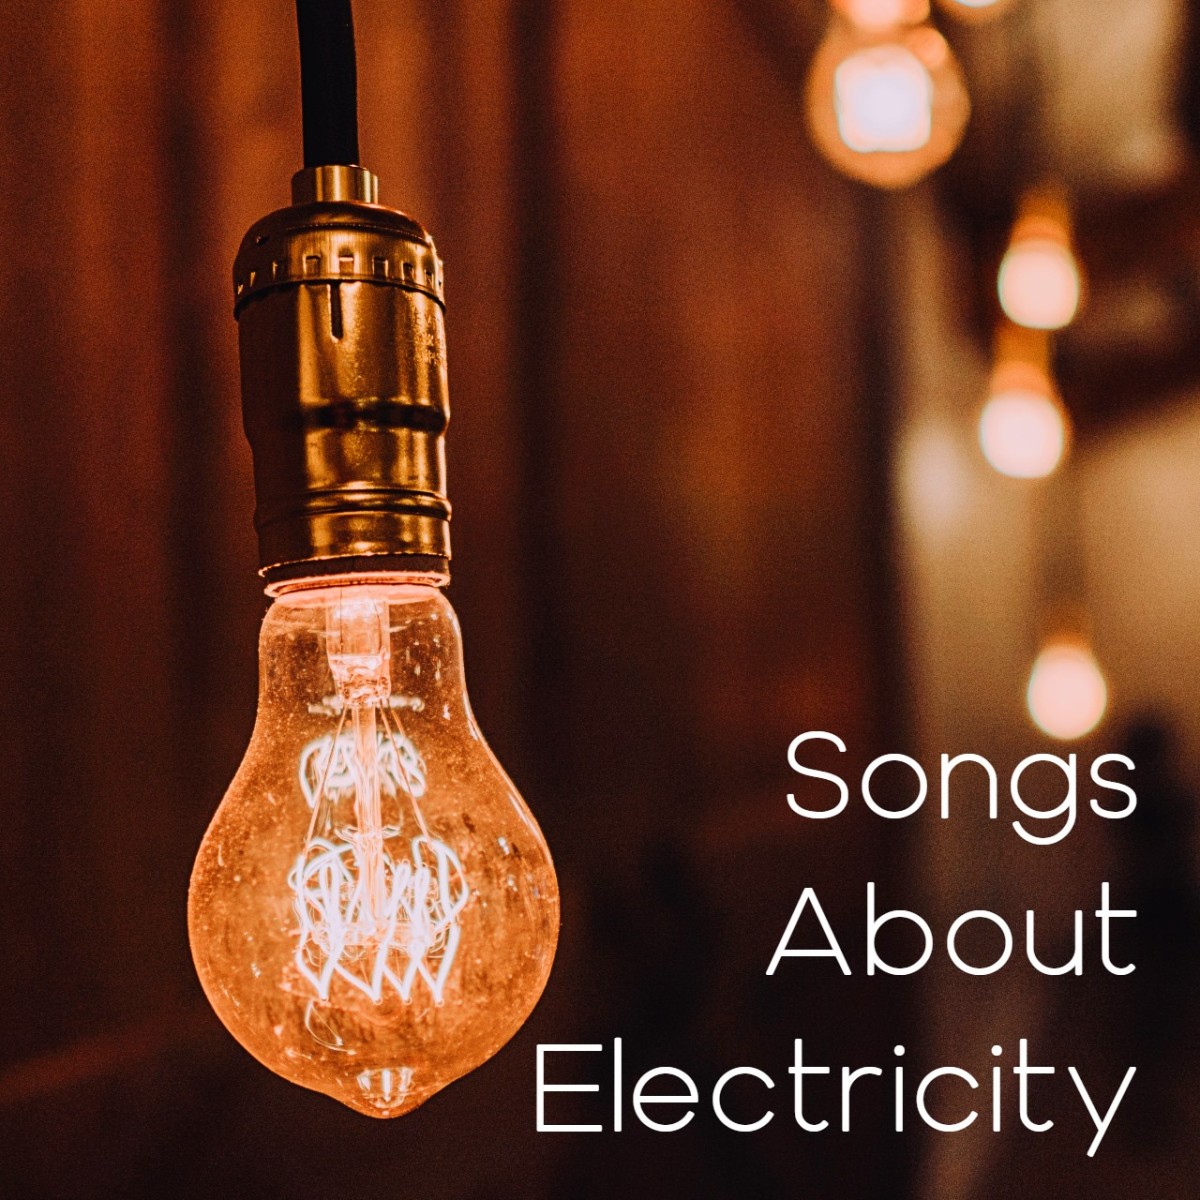 55 Songs About Electricity